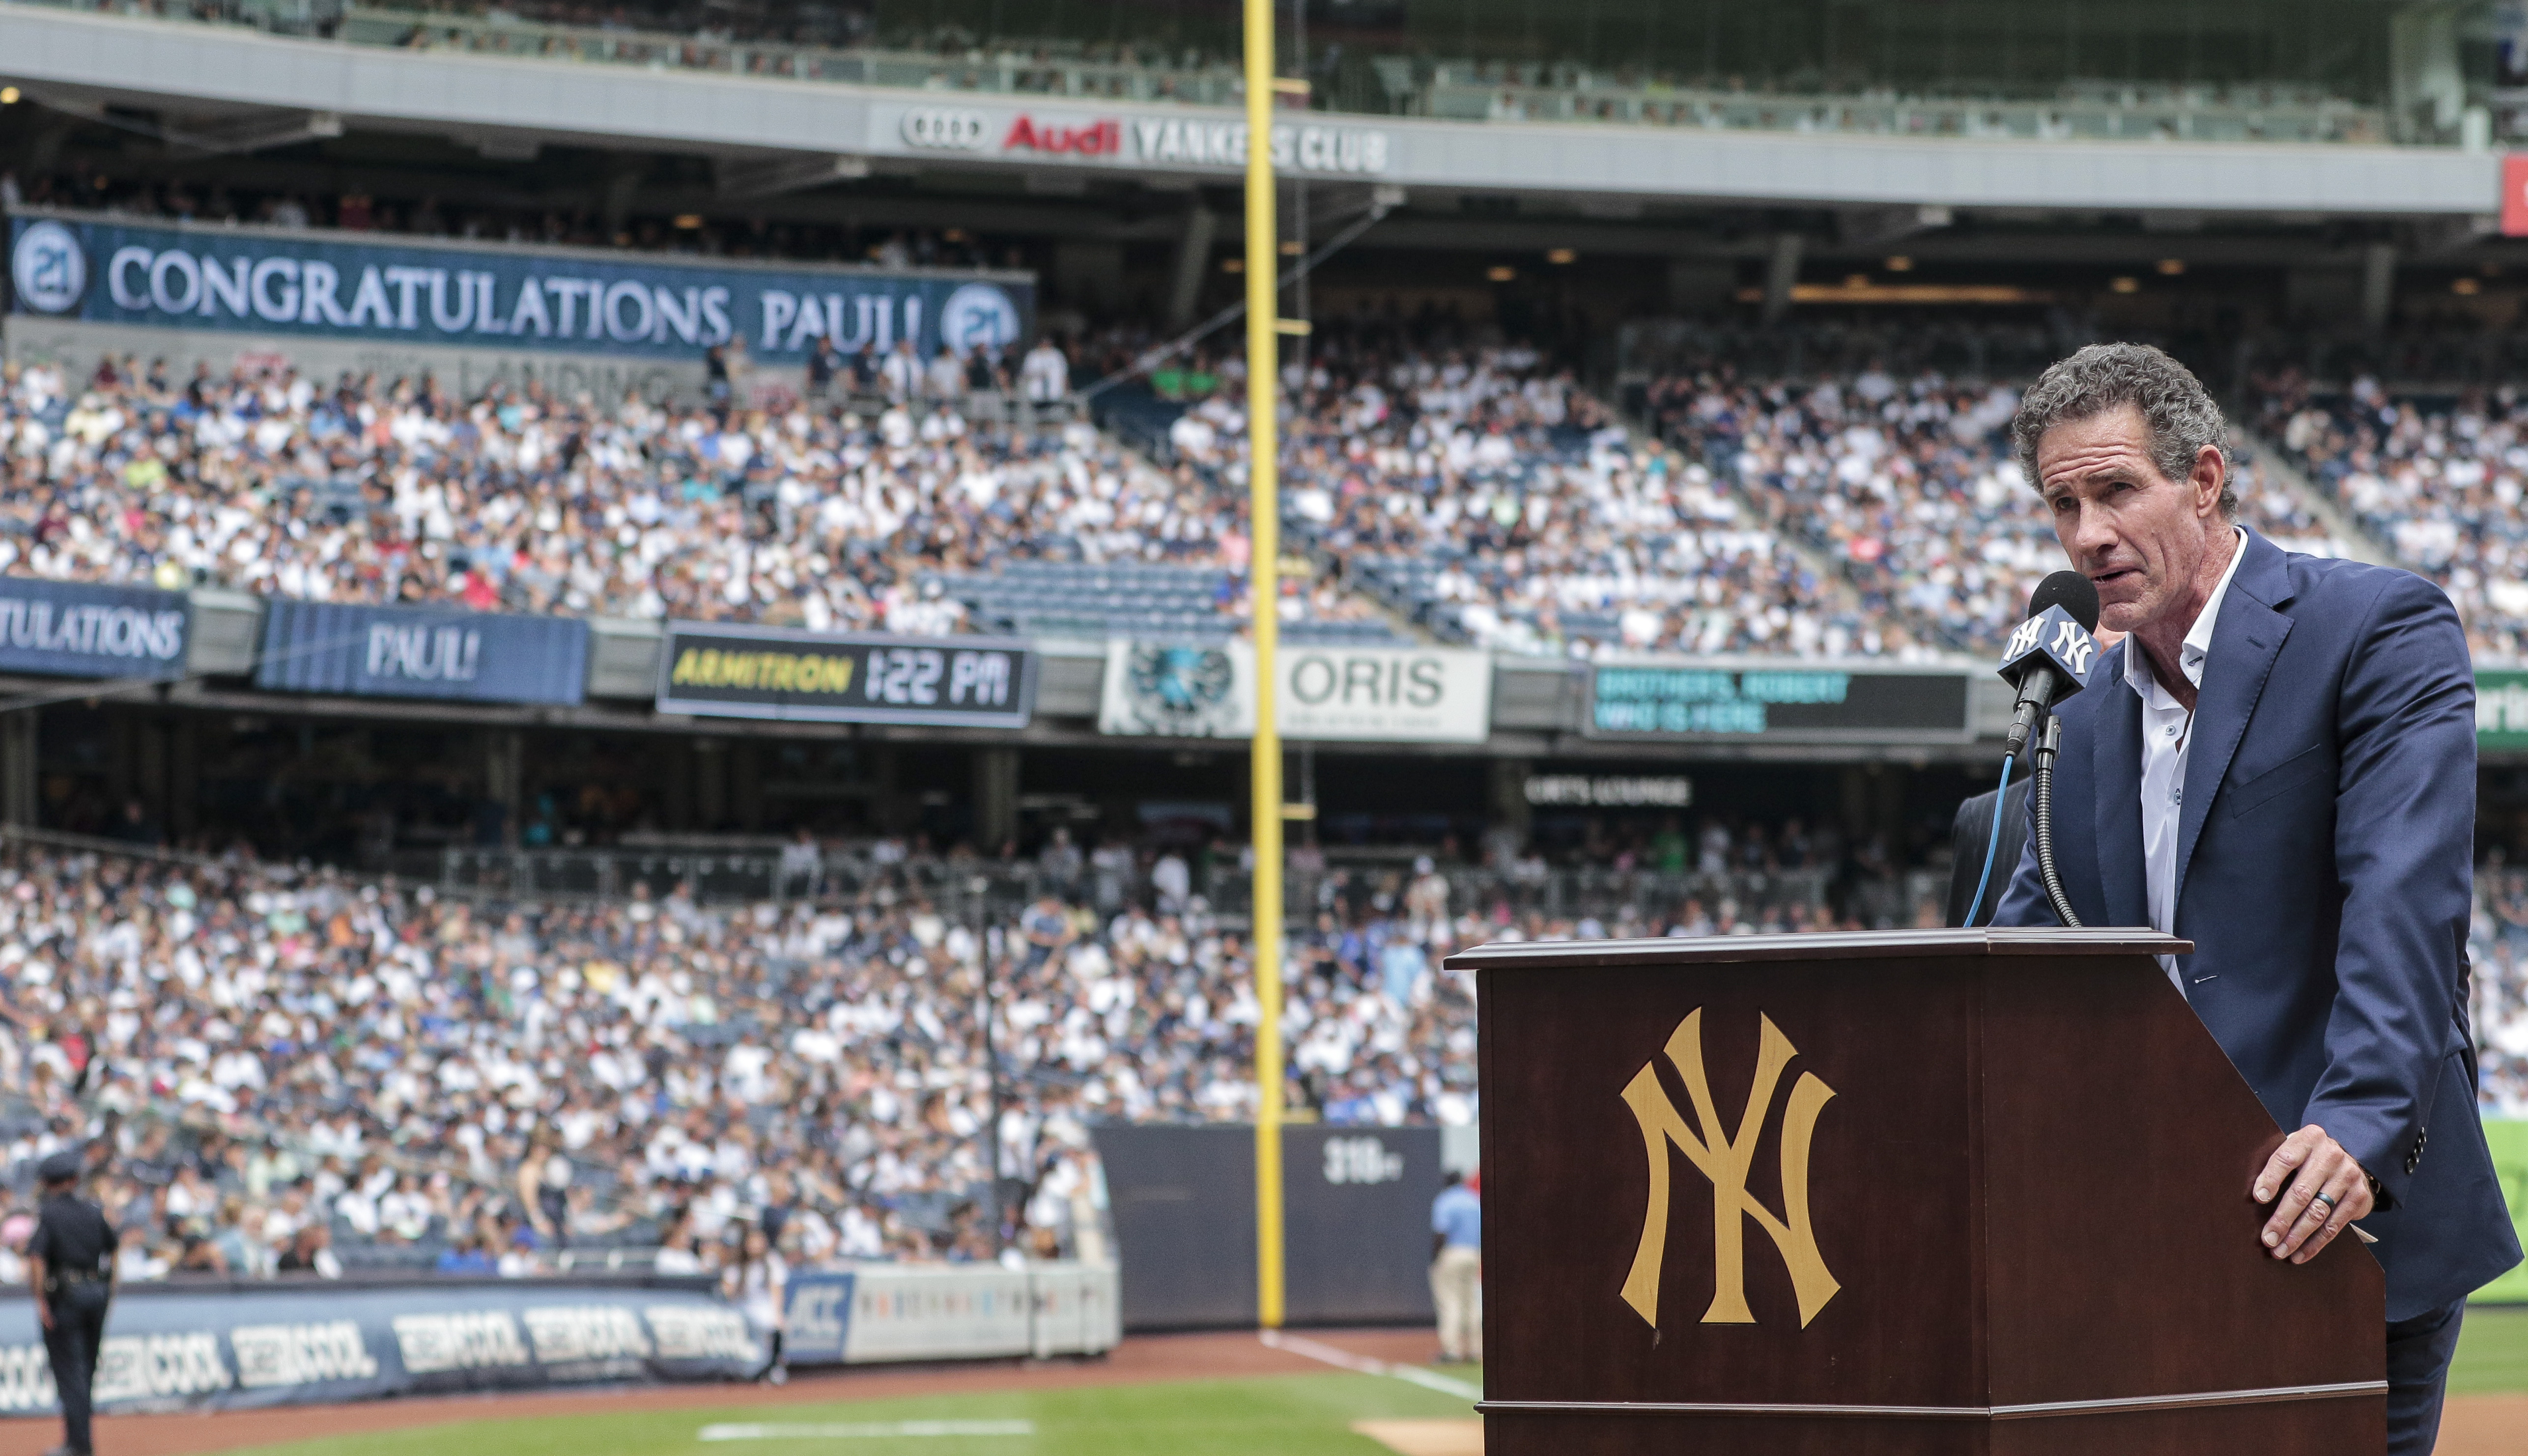 The Yankees Retire Paul O'Neill's Number 21 - The New York Times